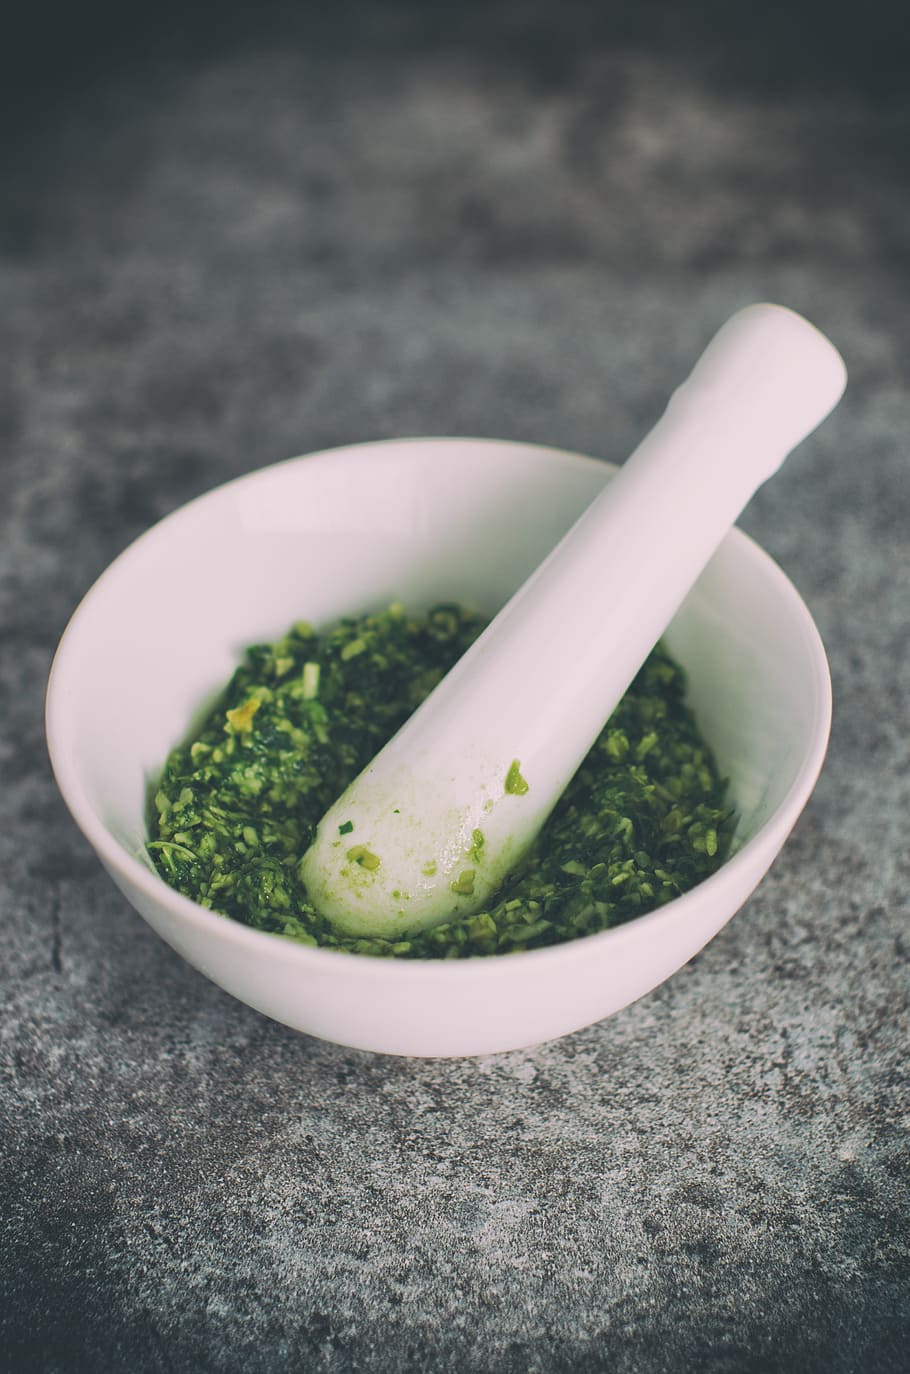 vegetable grind in mortar and pestle, white ceramic bowl with pestle and green leaf spices